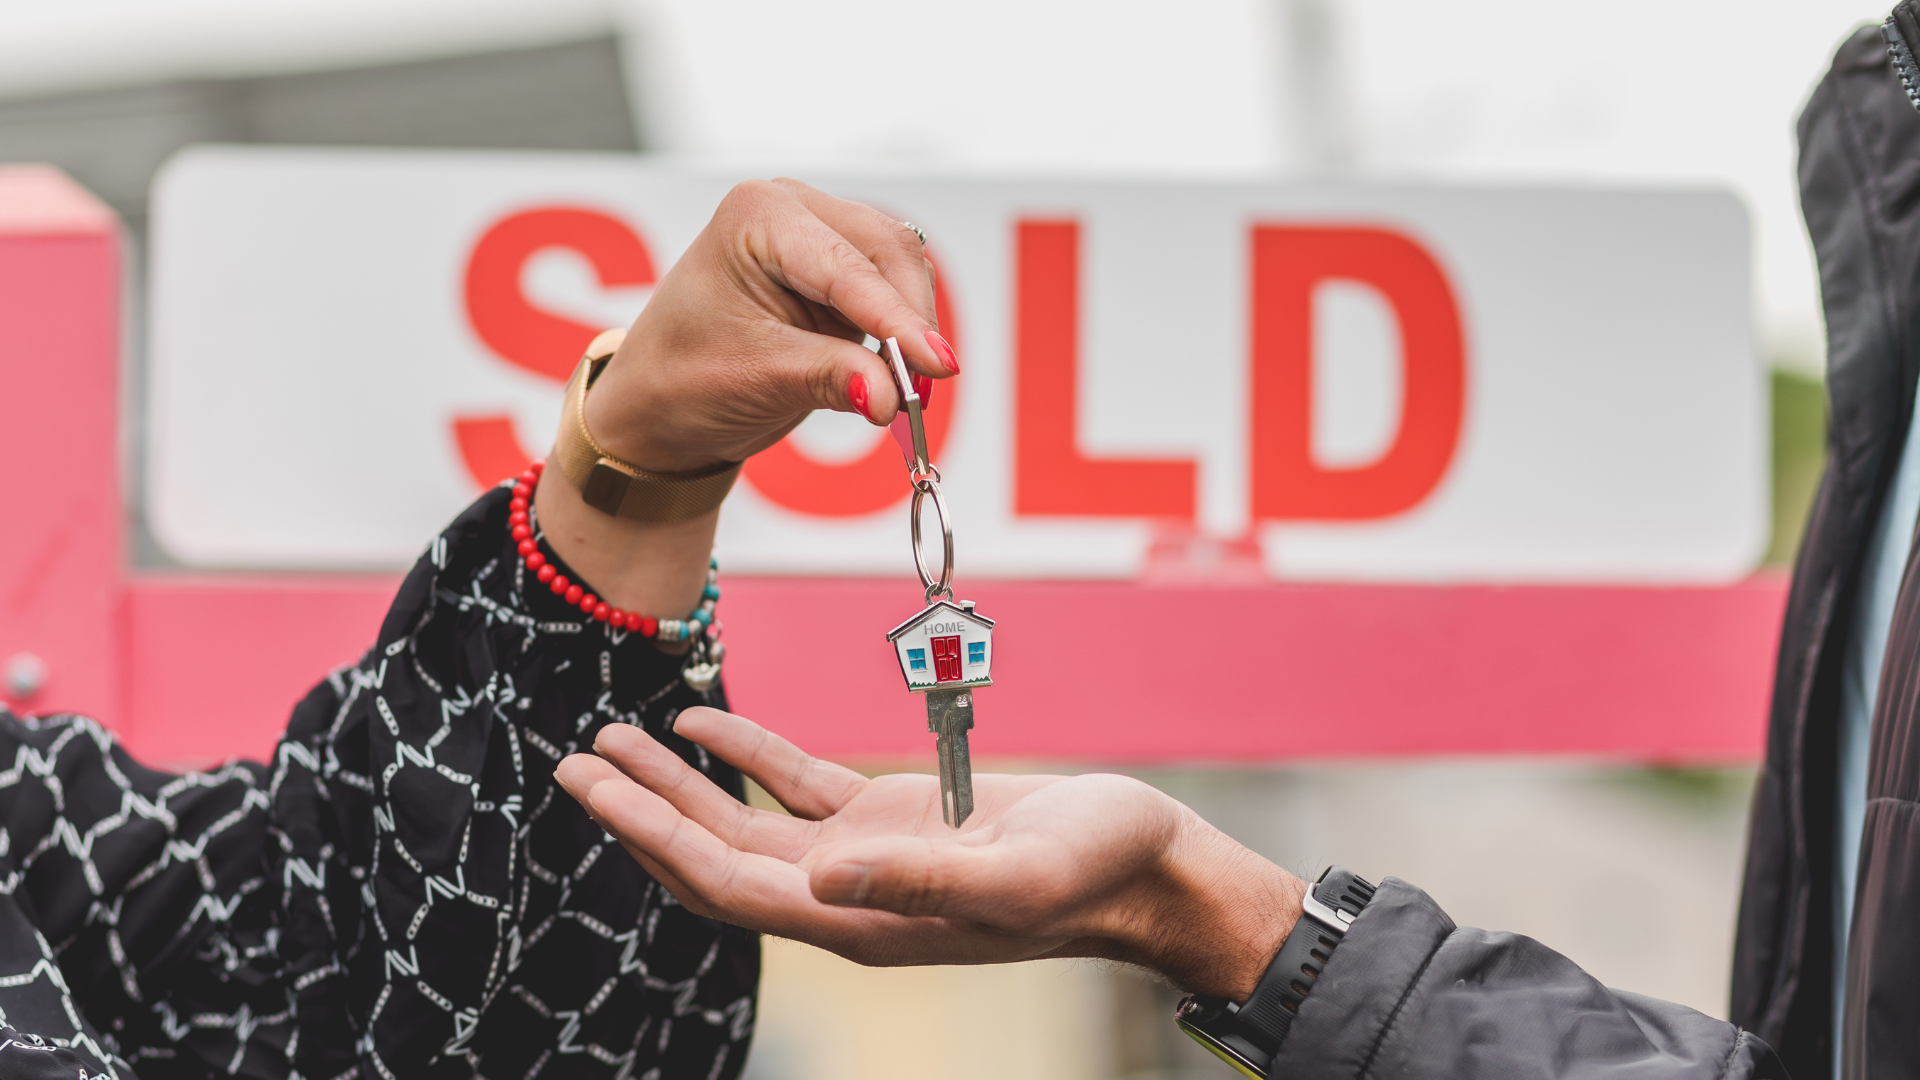 Handshake between two individuals in front of a house with a sold sign, symbolising a peaceful property buyout and new beginnings.